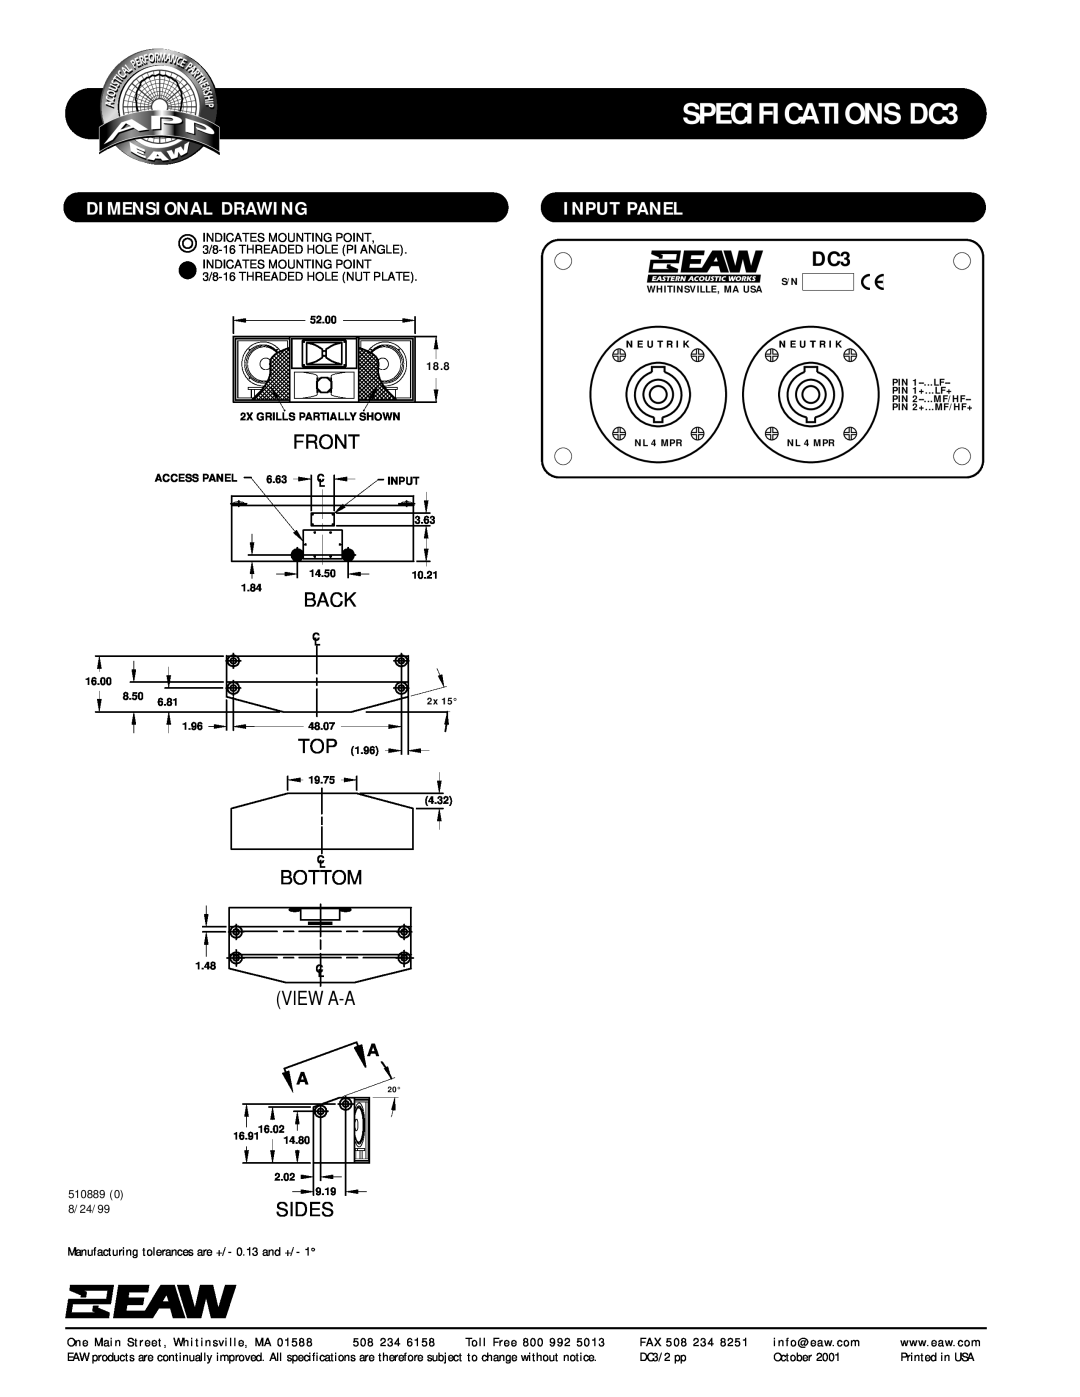 EAW specifications Dimensional Drawing, Input Panel, SPECIFICATIONS DC3, Bottom, View A-A, 18.8, 8/24/99 